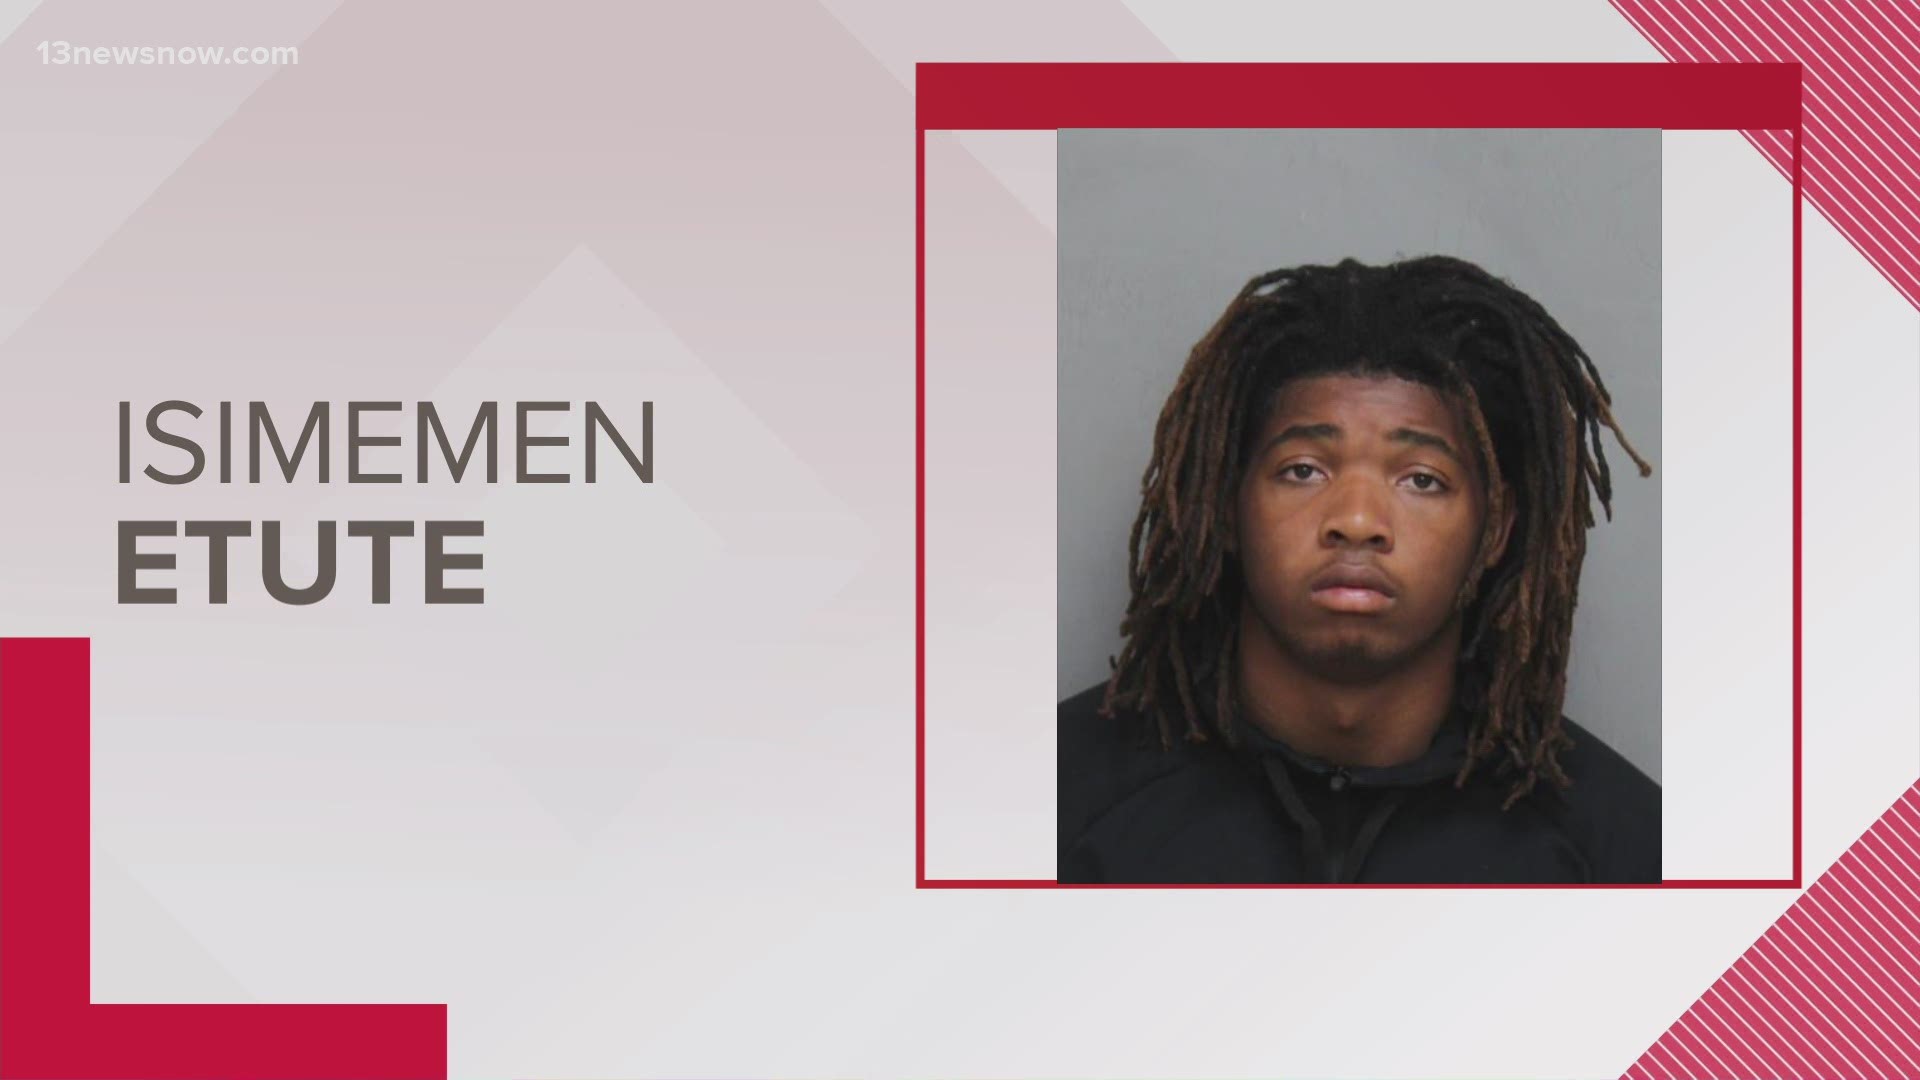 Virginia Tech said Isimemen Etute was on interim suspension, and was also suspended from the football team, where he played as a linebacker.